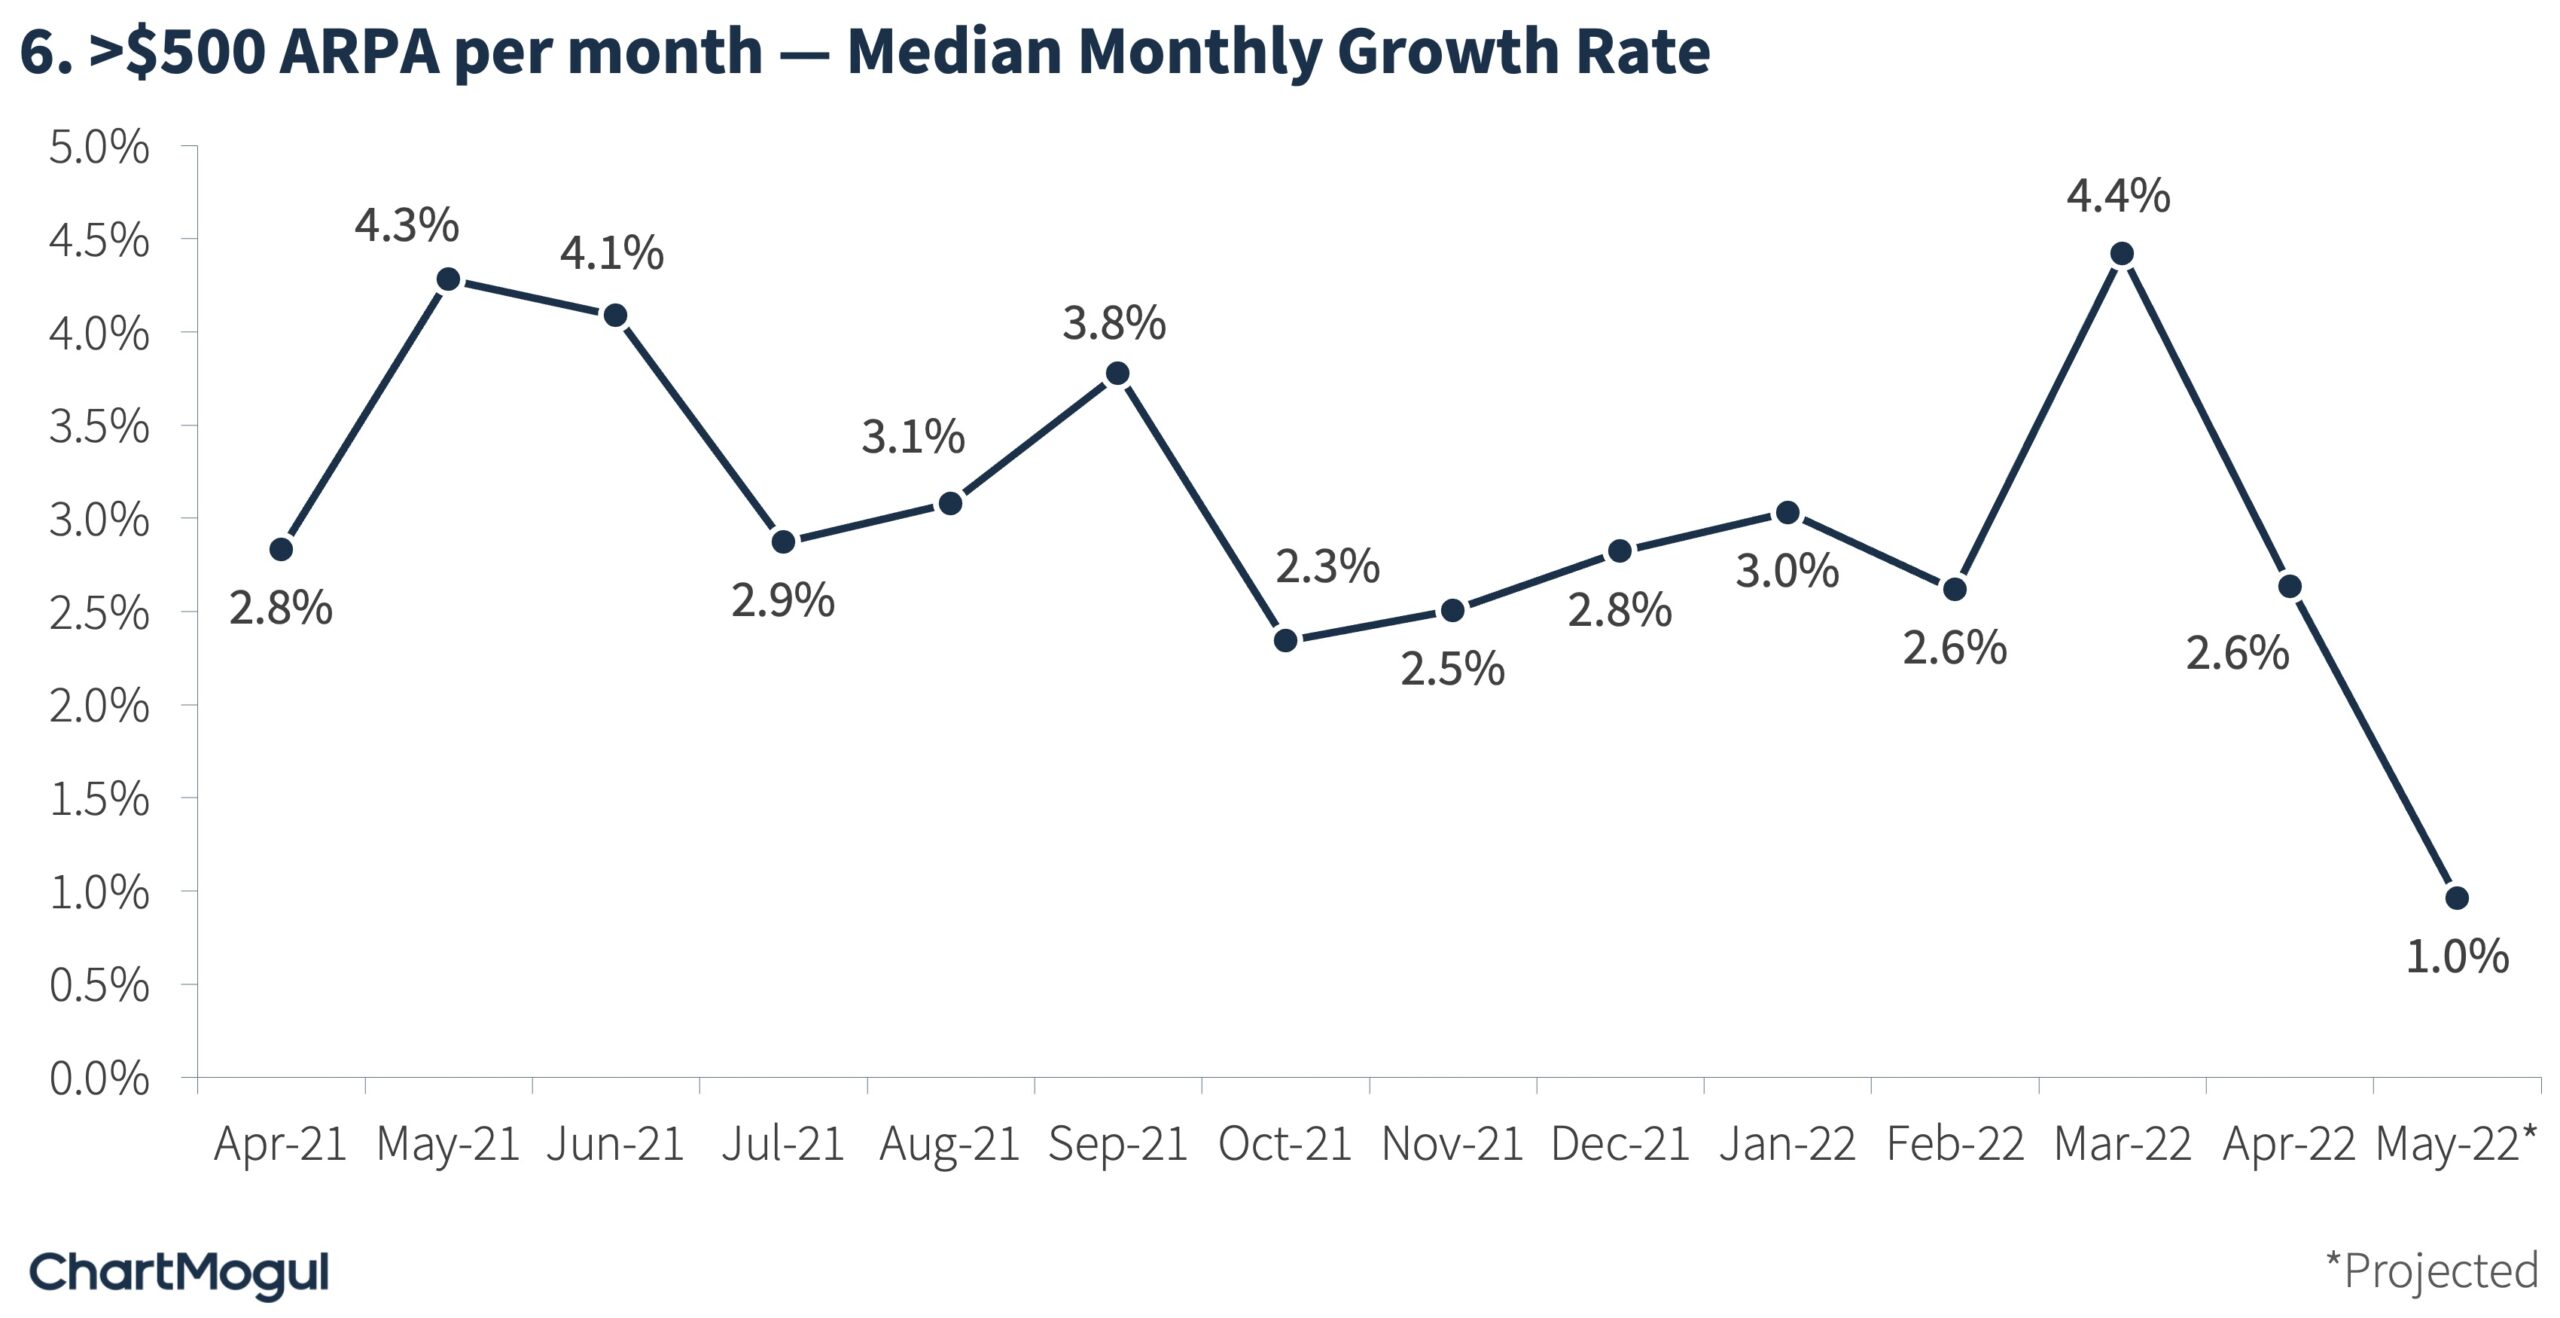 Median monthly growth rate